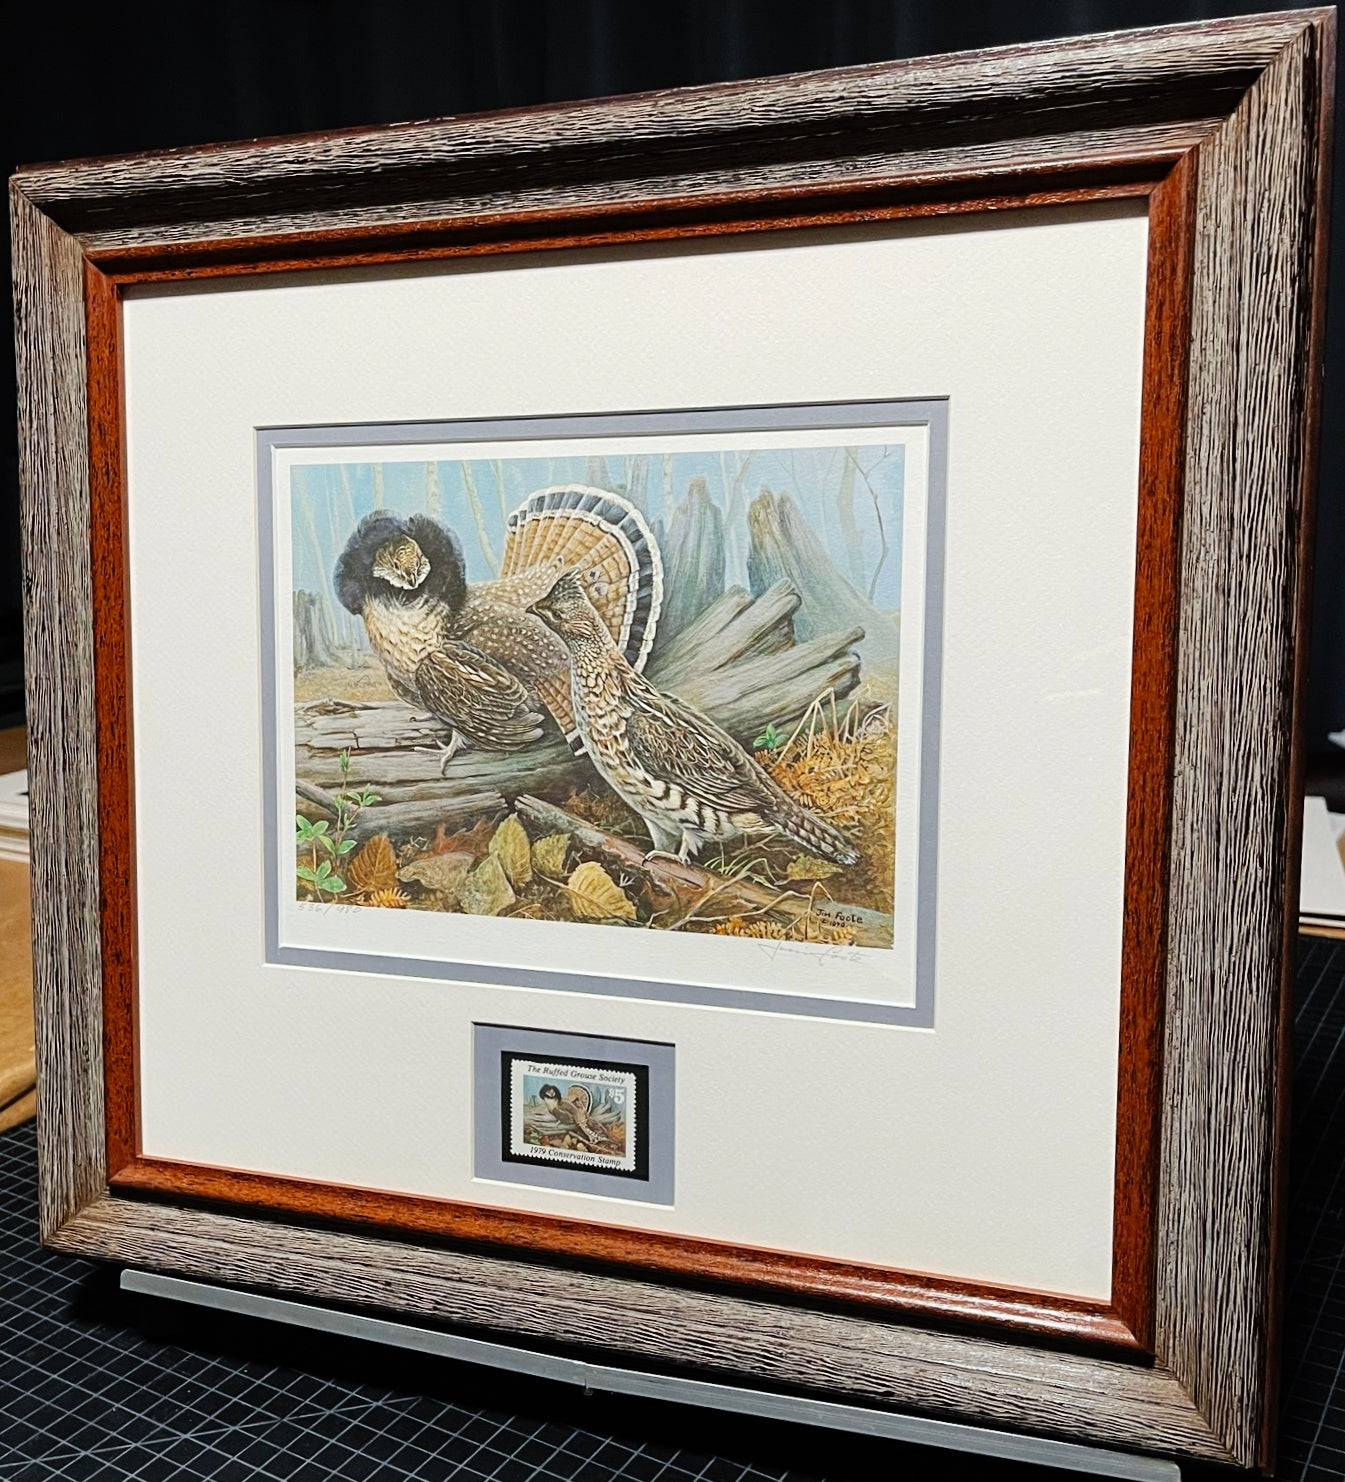 Jim Foote 1979 The Ruffed Grouse Society Conservation Stamp Print With Stamp - Brand New Custom Sporting Frame